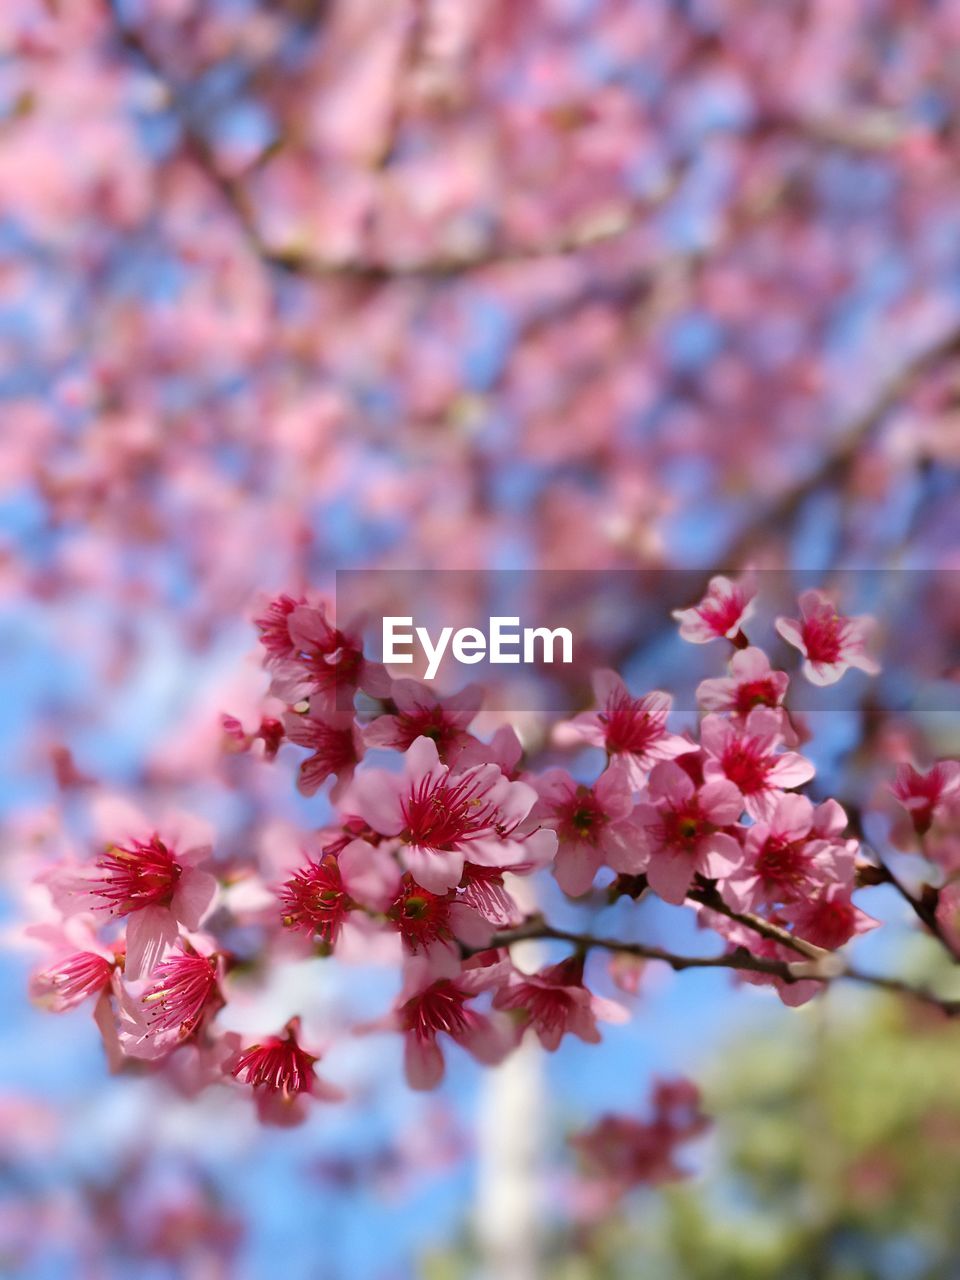 CLOSE-UP OF FRESH PINK FLOWERS ON TREE